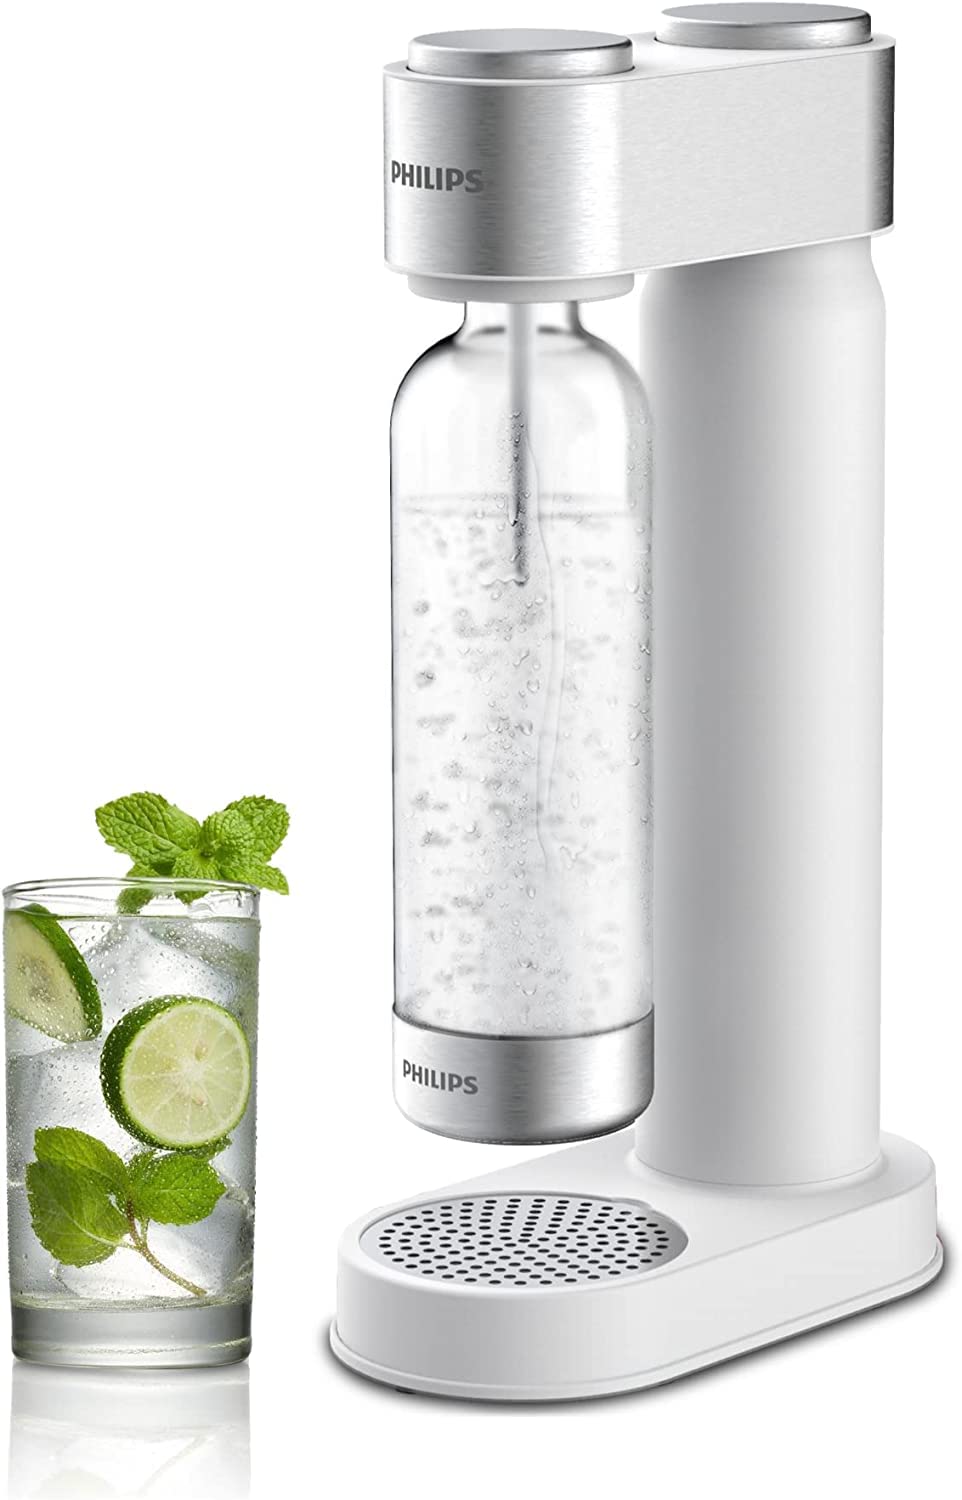 Philips Sparkling Water Maker Soda Maker Soda Streaming Machine for Carbonating with 1L Carbonating Bottle, Seltzer Fizzy Water Maker, Compatible with Any Screw-in 60L CO2 Carbonator